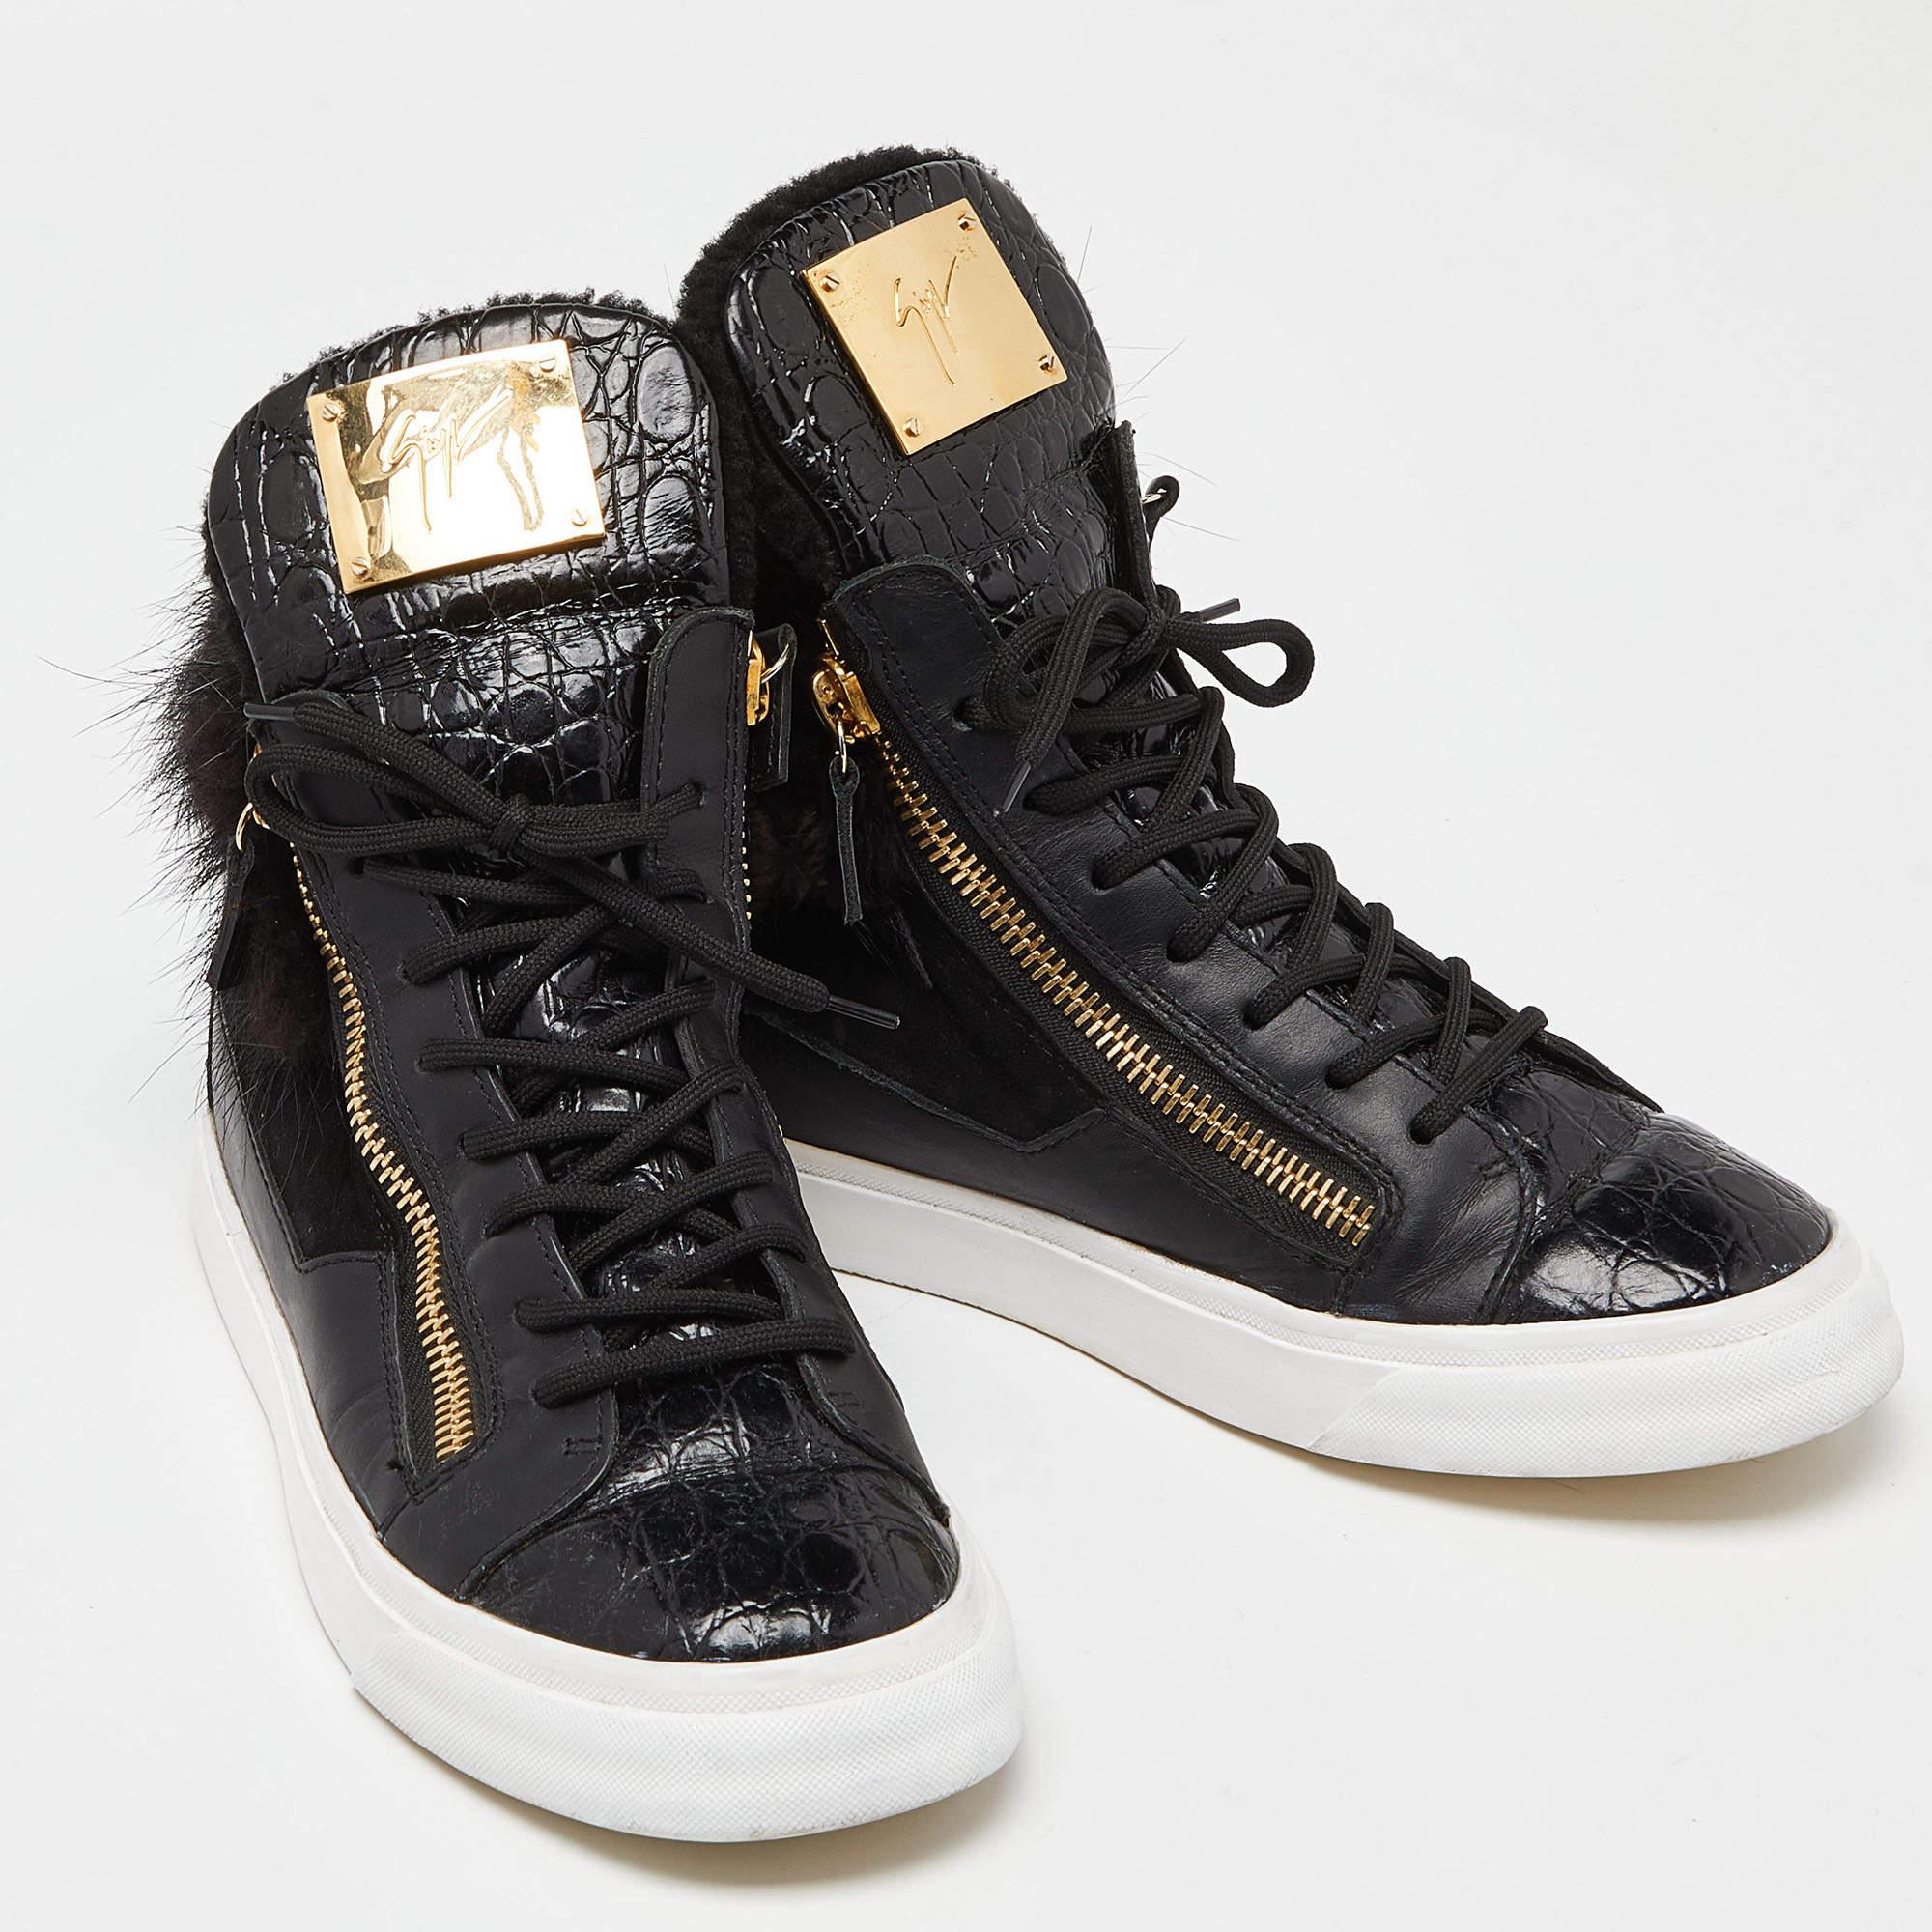 Giuseppe Zanotti Black Leather Suede and Calfhair London High-Top Sneakers Size  For Sale 1